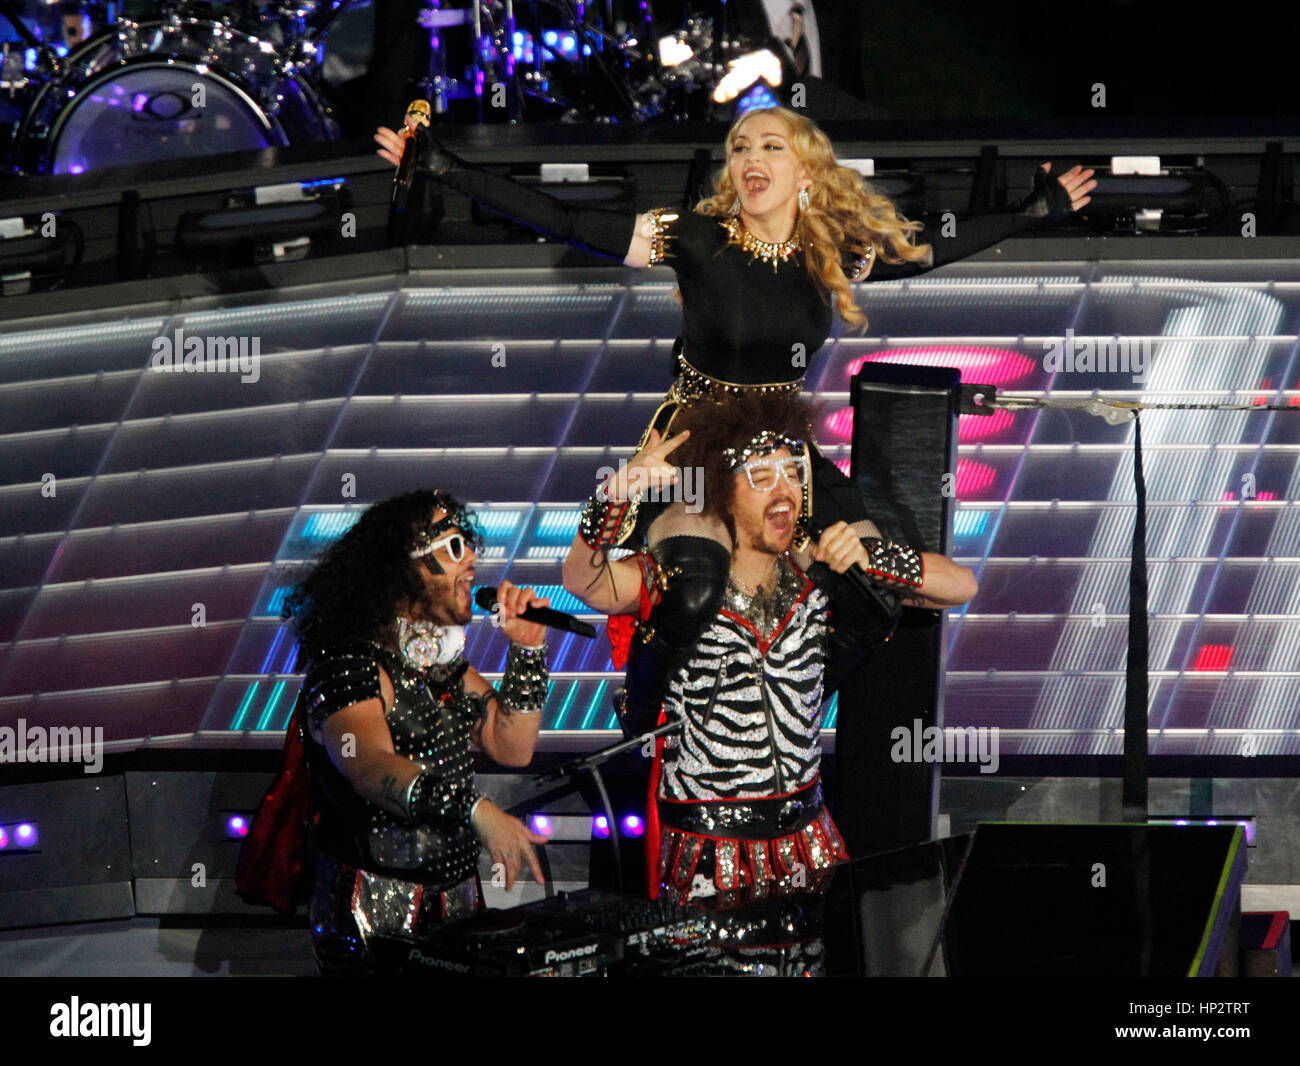 Madonna performs with LMFAO, (Redfoo) Stefan Kendal Gordy, (SkyBlu) Skyler Husten Gordy, at the half-time show during Super Bowl XLVI in Indianapolis, Indiana on February 5, 2012 Photo by Francis Specker Stock Photo